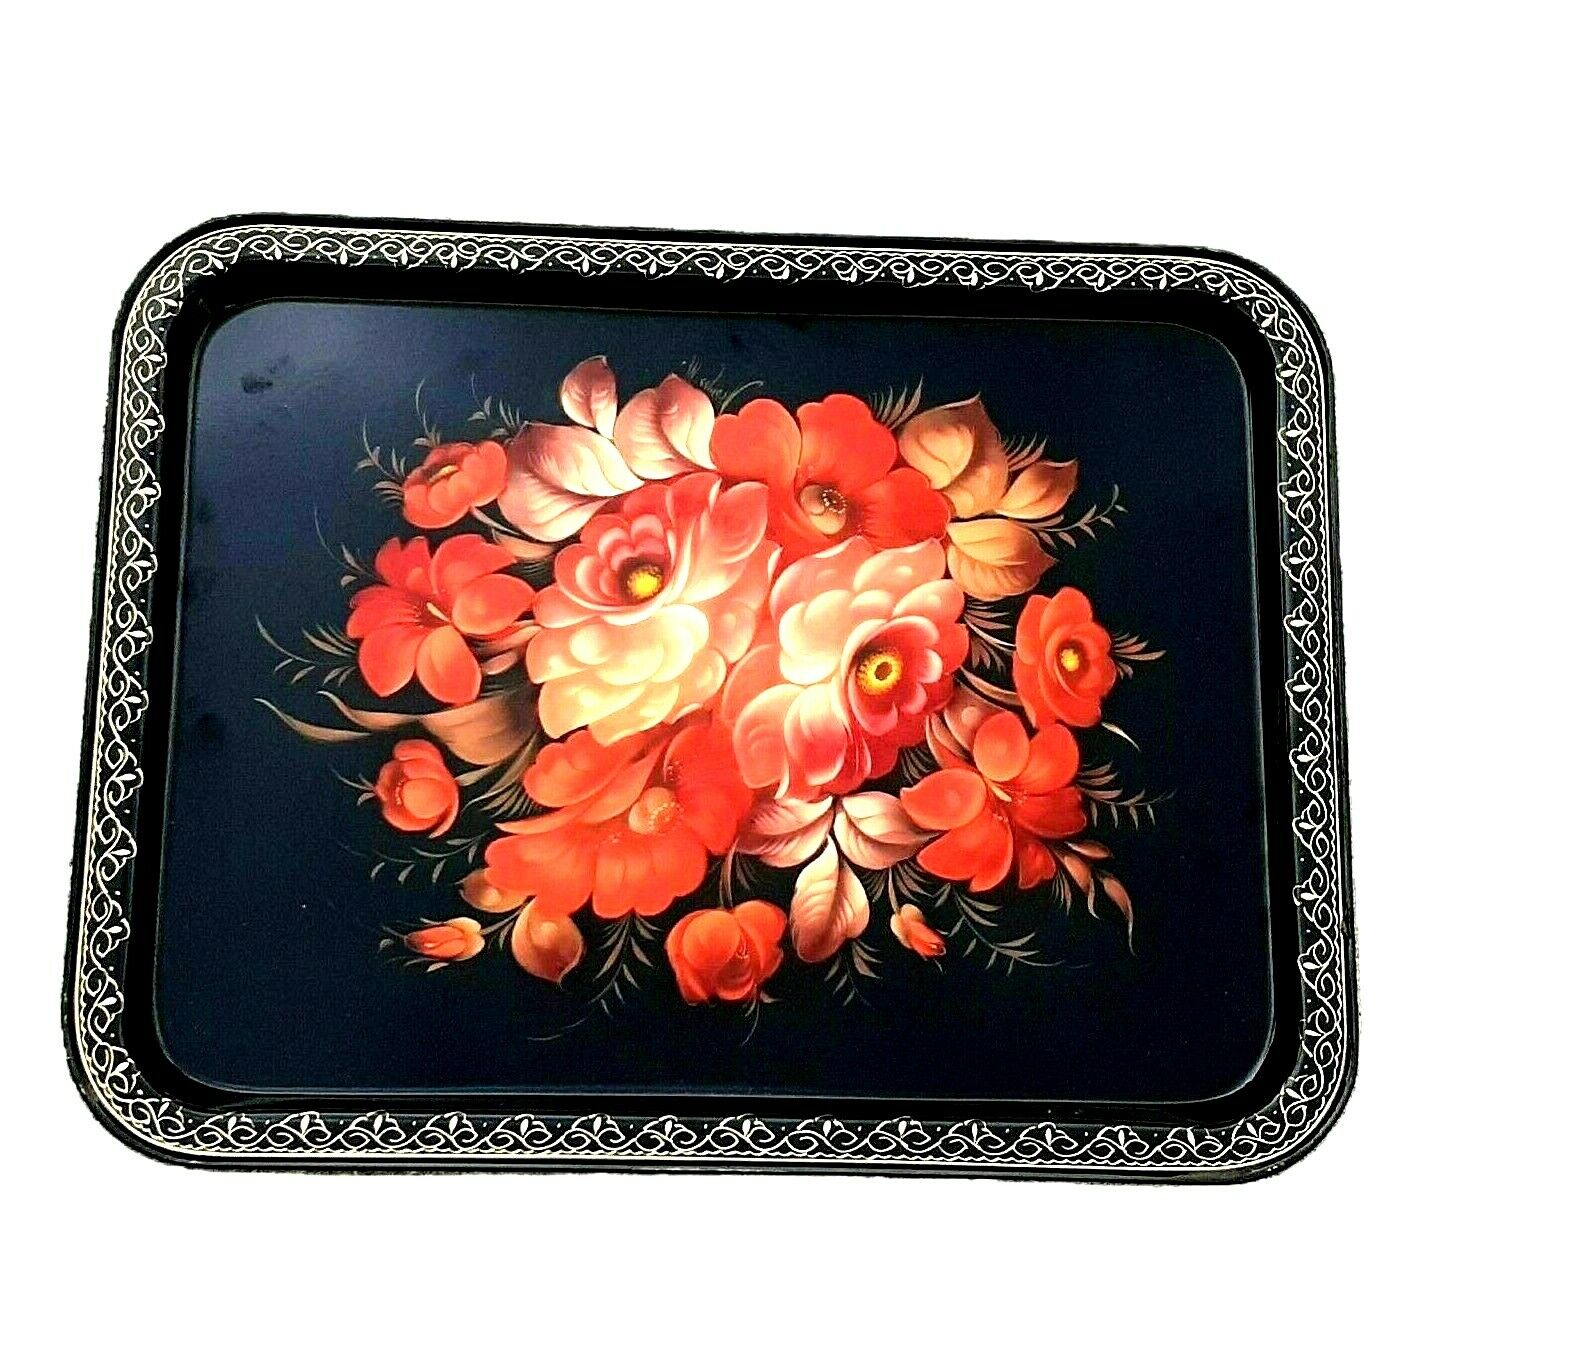 VTG Zhostovo Tray Metal Hand Painted Artist Signed Tole Rosemaling 17.5\